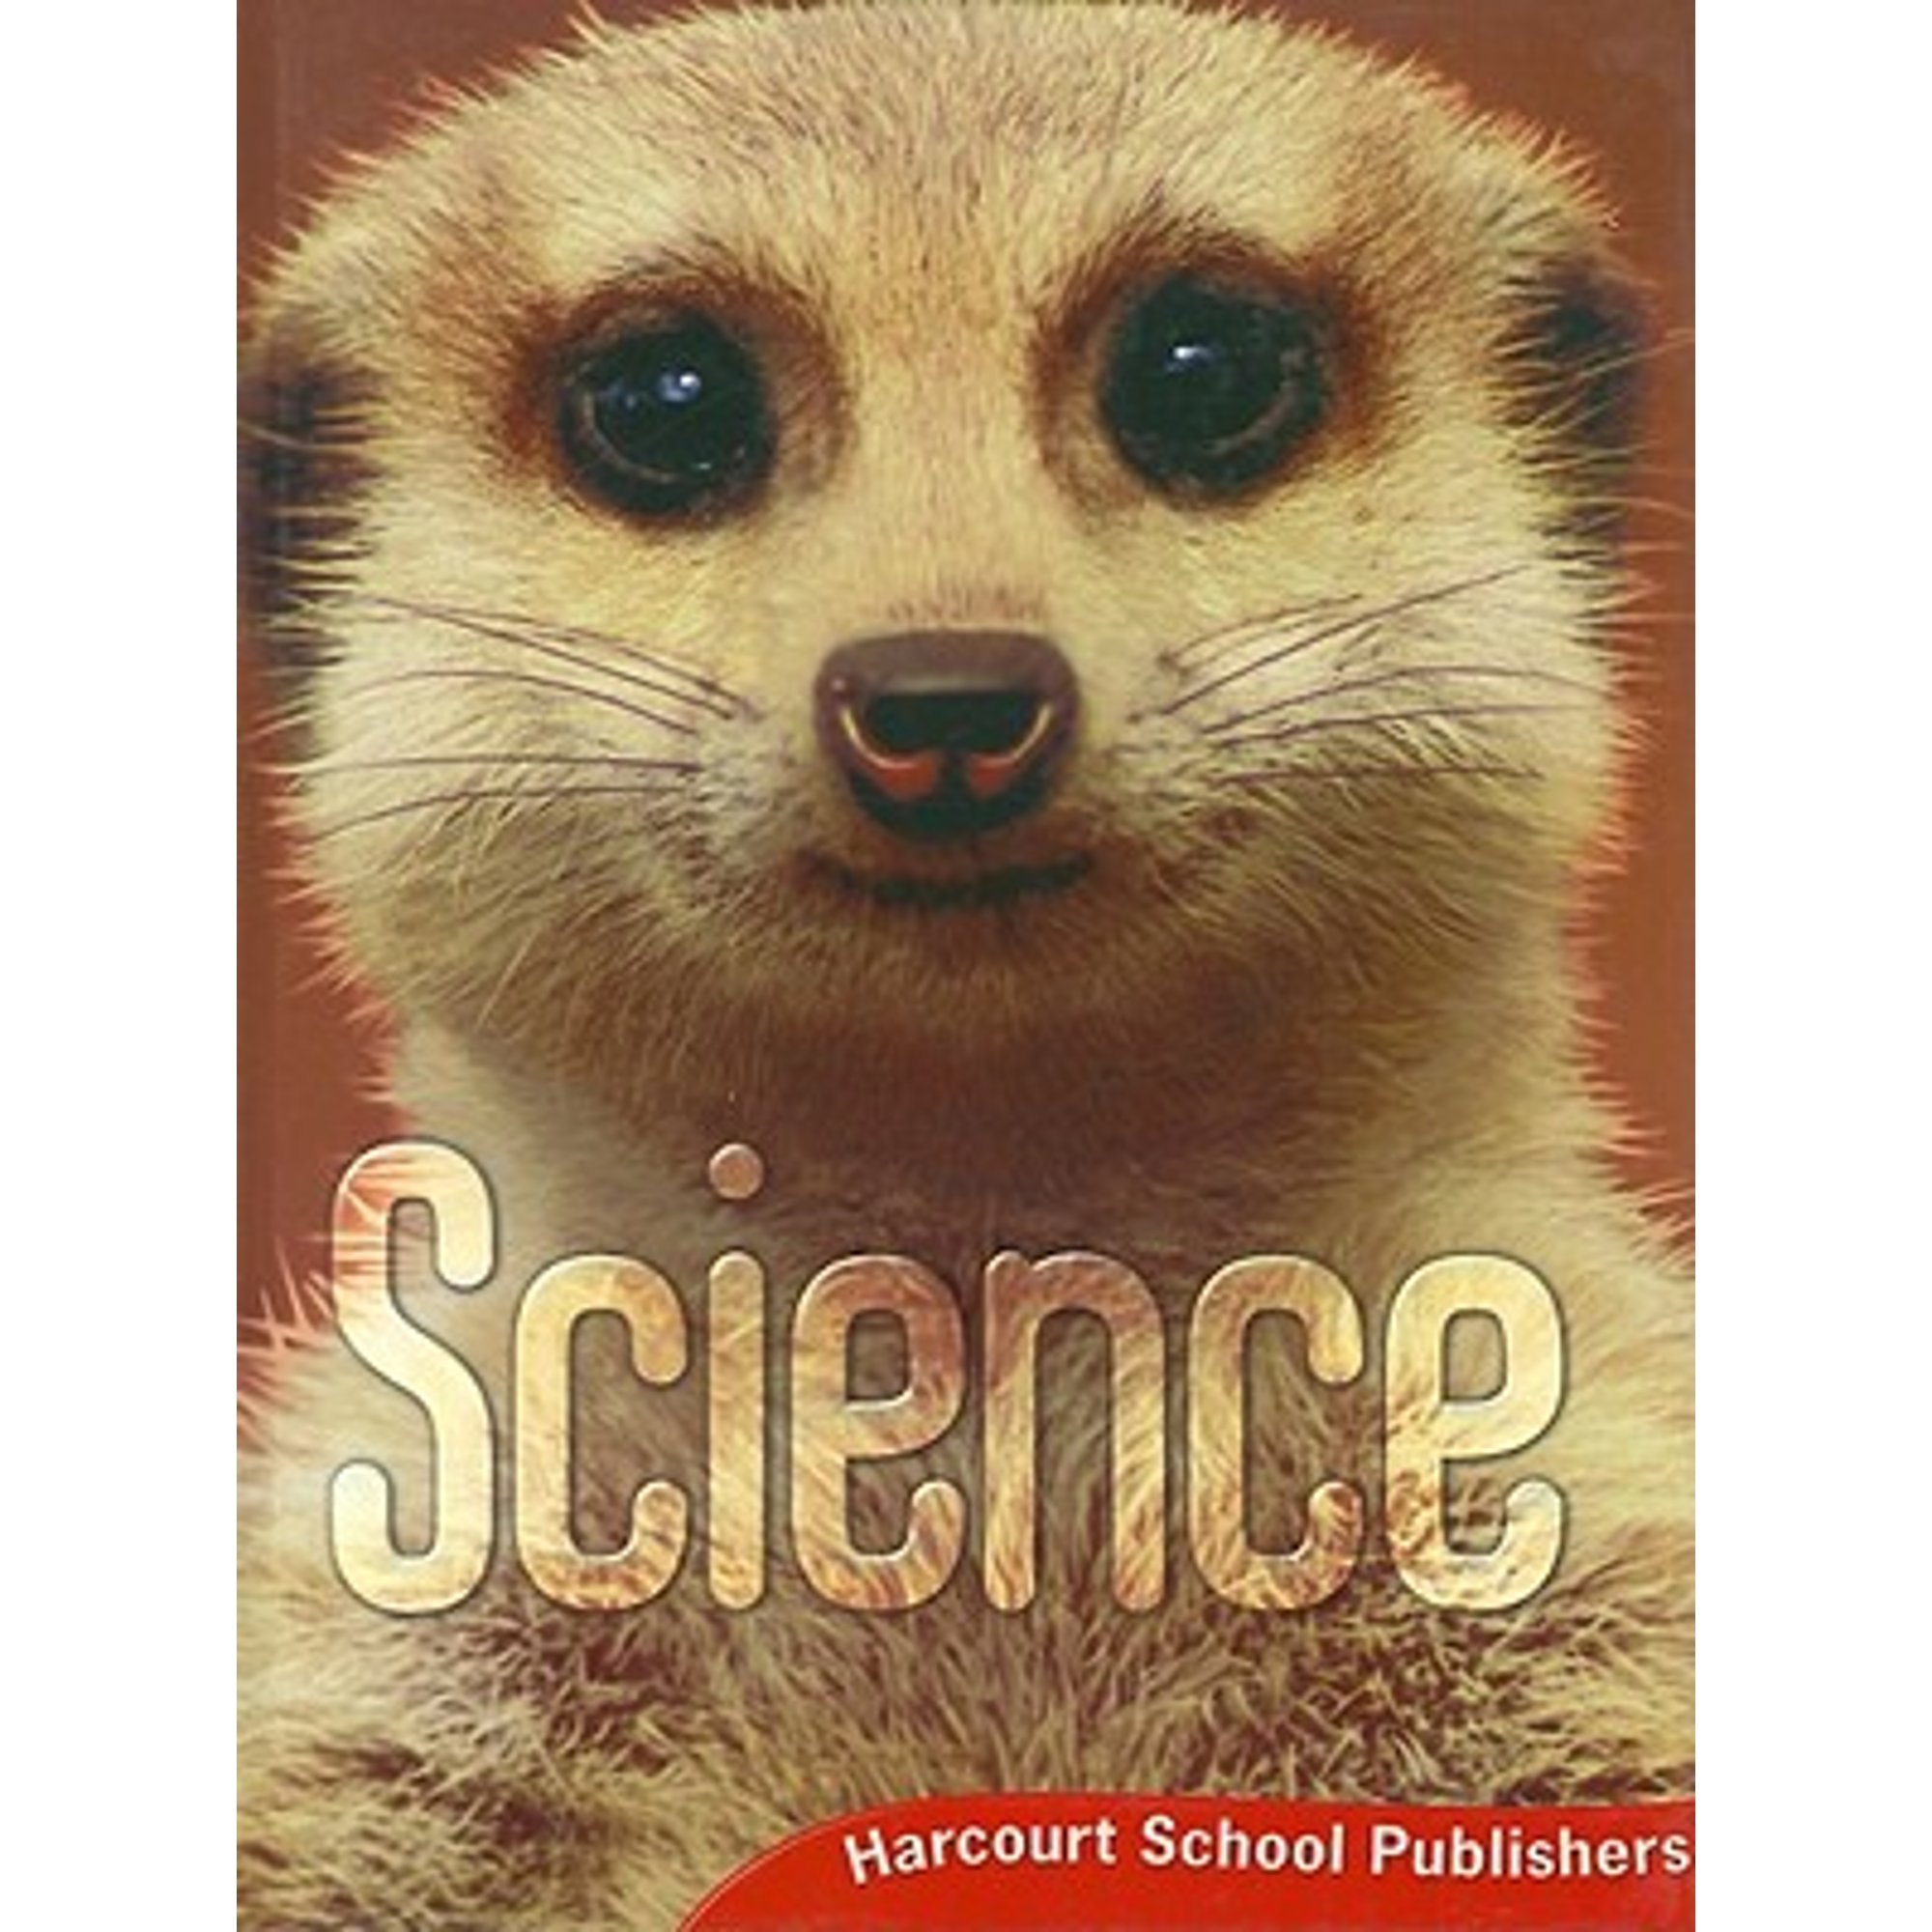 Student　(Prepared　Harcourt　Pre-Owned　Publishers　(Hardcover　Edition　School　Grade　Harcourt　Science:　publication　9780153400612)　2006　for　by　by)